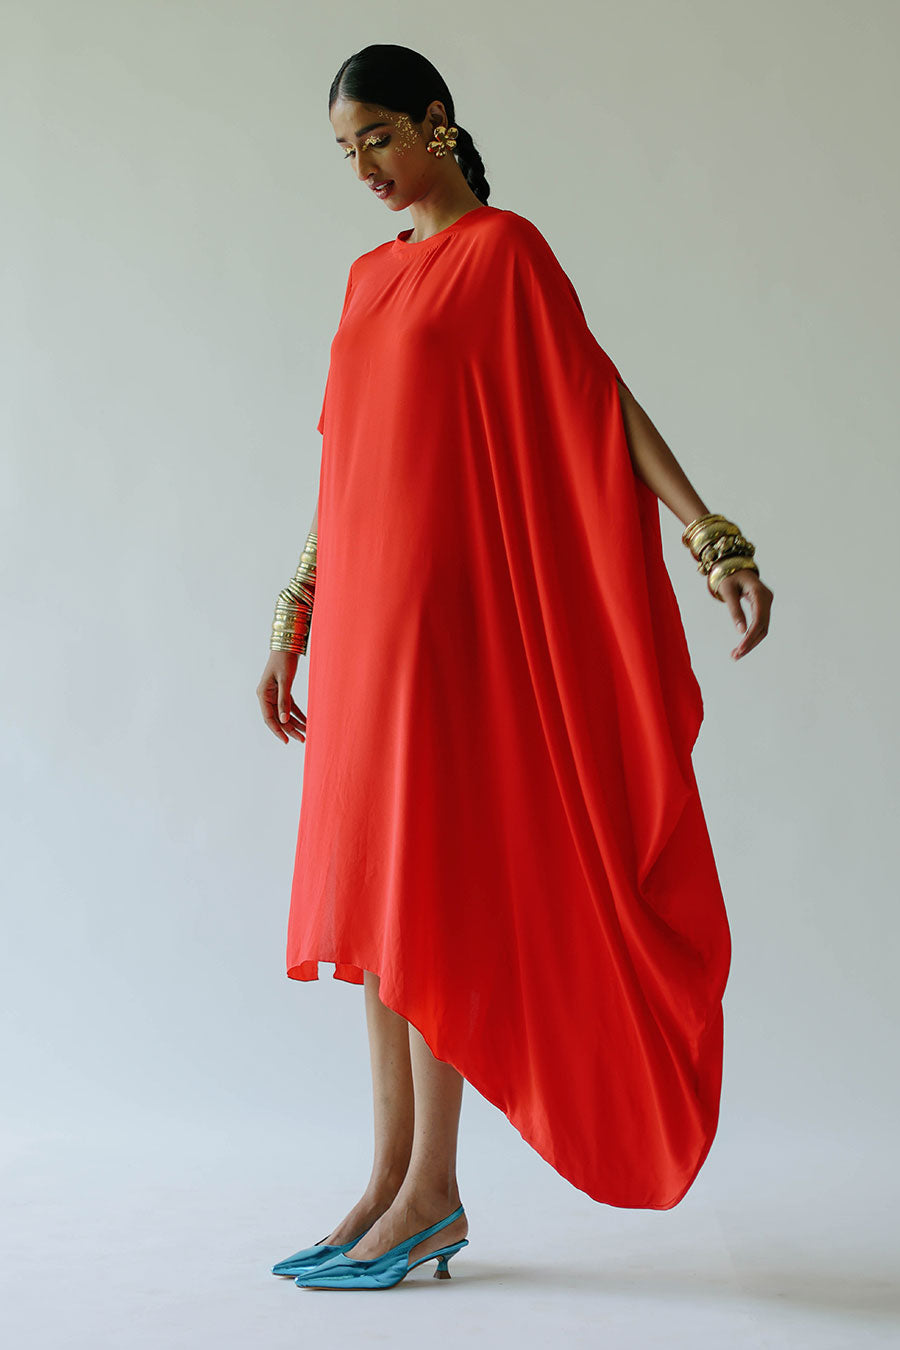 Red Fiery Claire Dress